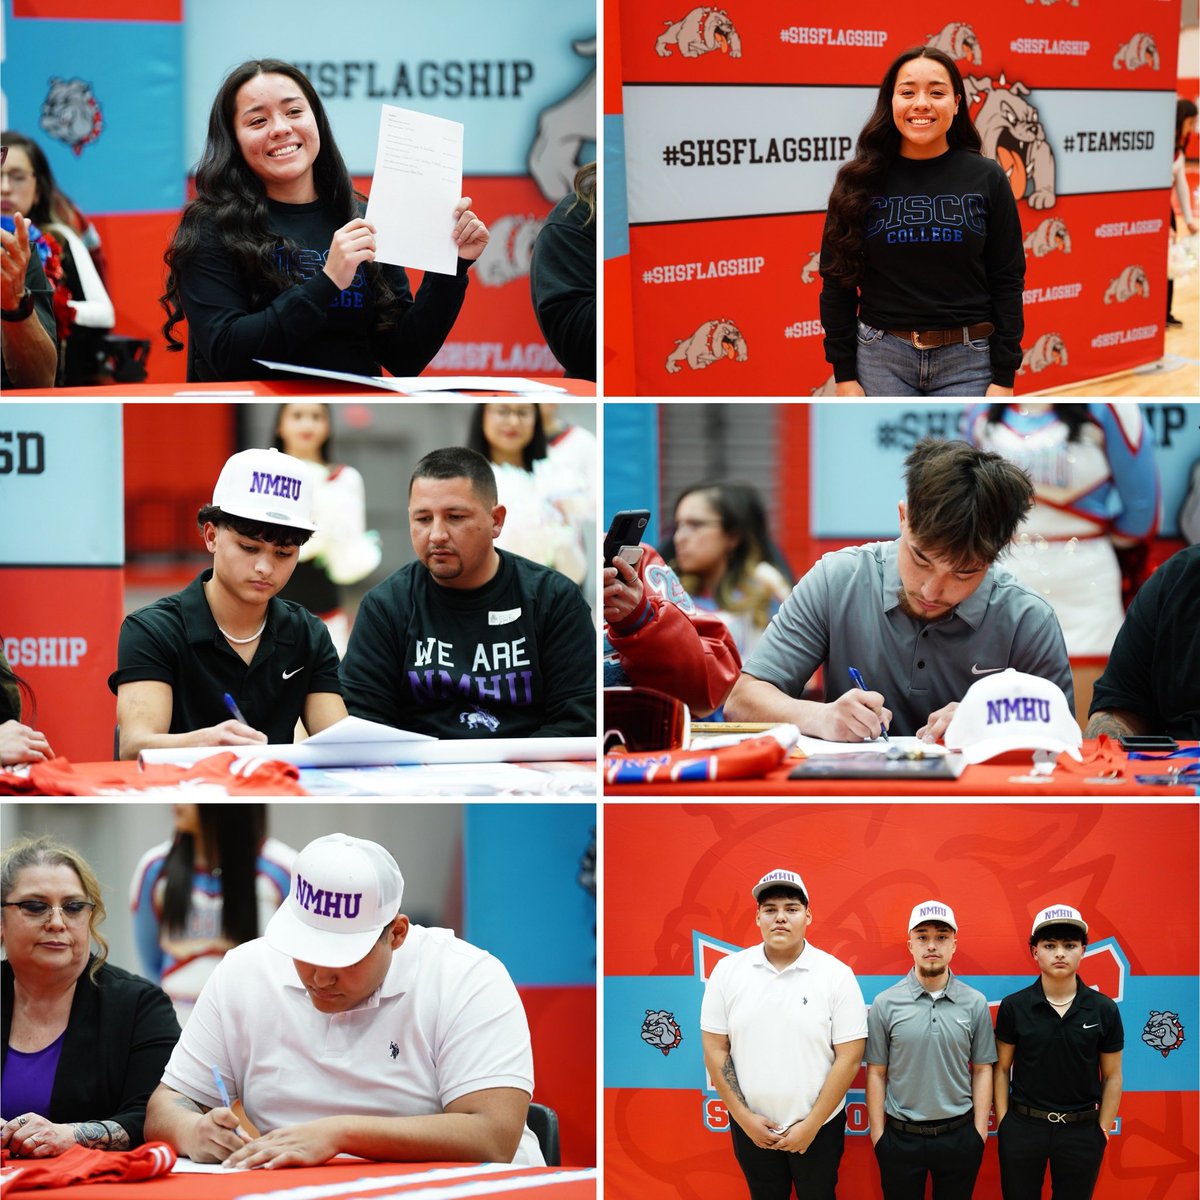 What an amazing week it was for our student-athletes from Montwood, Pebble Hills, Eastlake, and Socorro High School who signed letters of intent to continue their education and play sports at the collegiate level. Best of luck to these extraordinary #TeamSISD students!